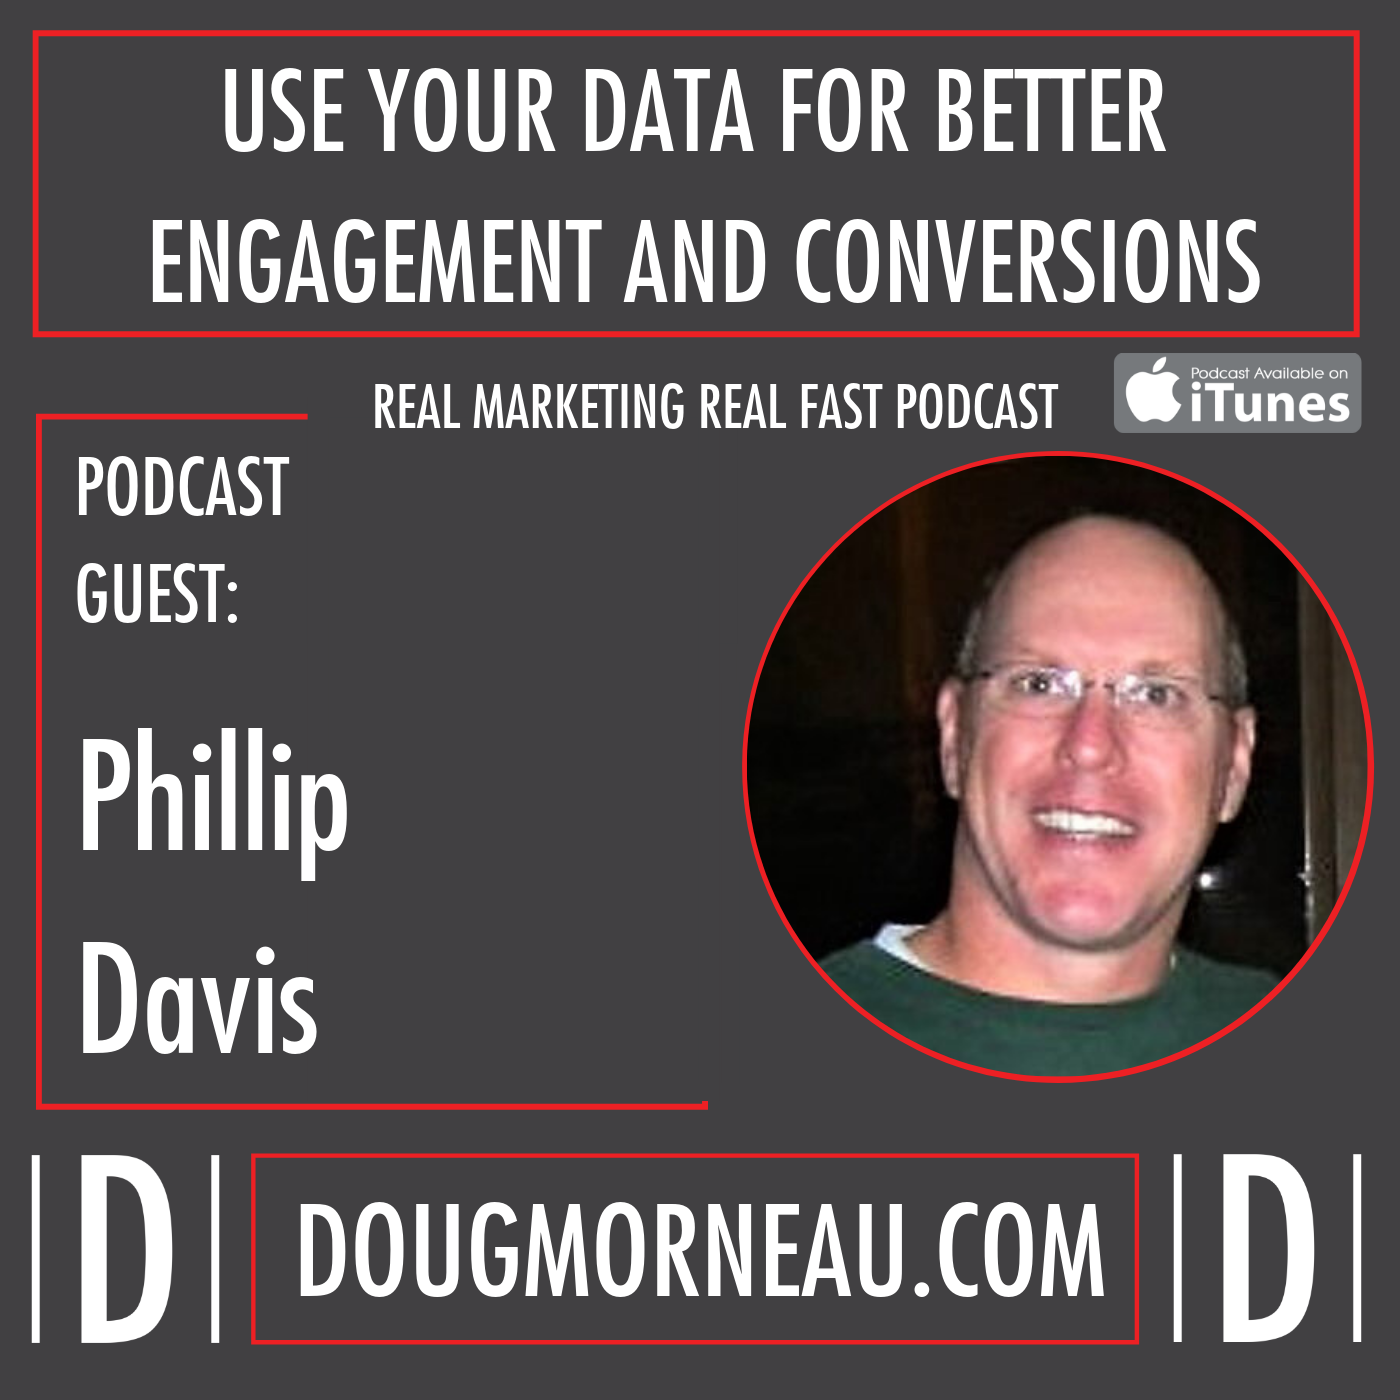 USE YOUR DATA FOR BETTER ENGAGEMENT AND CONVERSIONS - PHILLIP DAVIS - DOUG MORNEAU - REAL MARKETING REAL FAST PODCAST